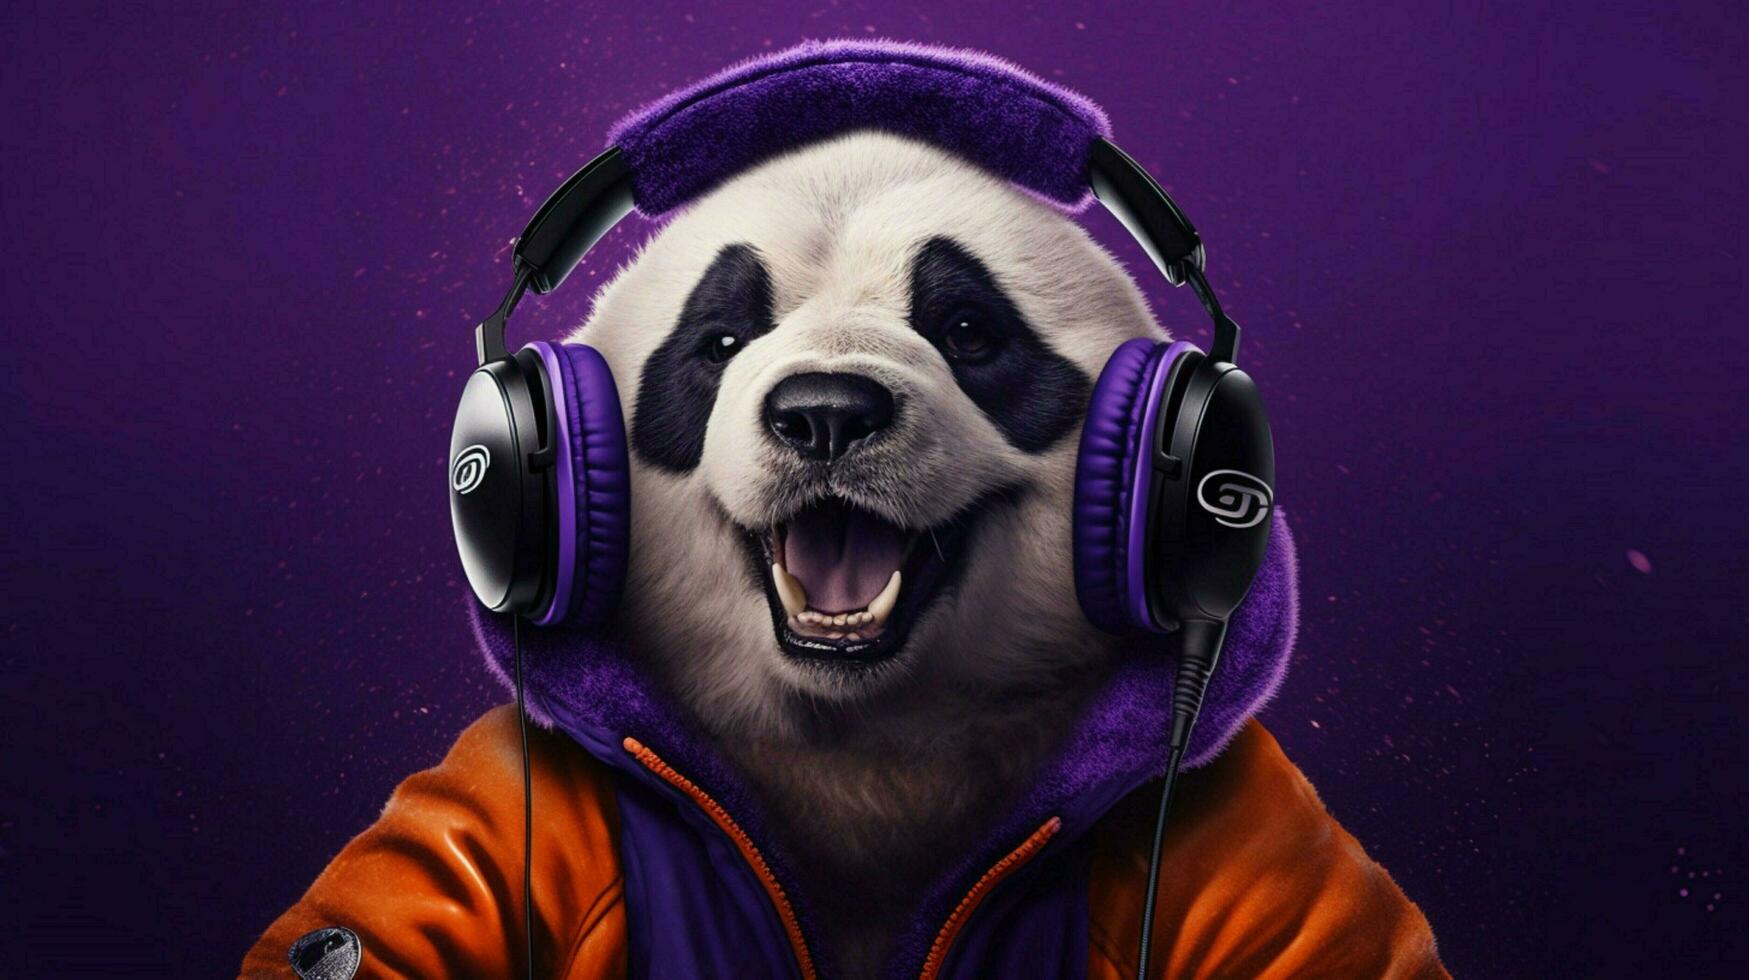 a panda dog in a purple jacket and headphones photo